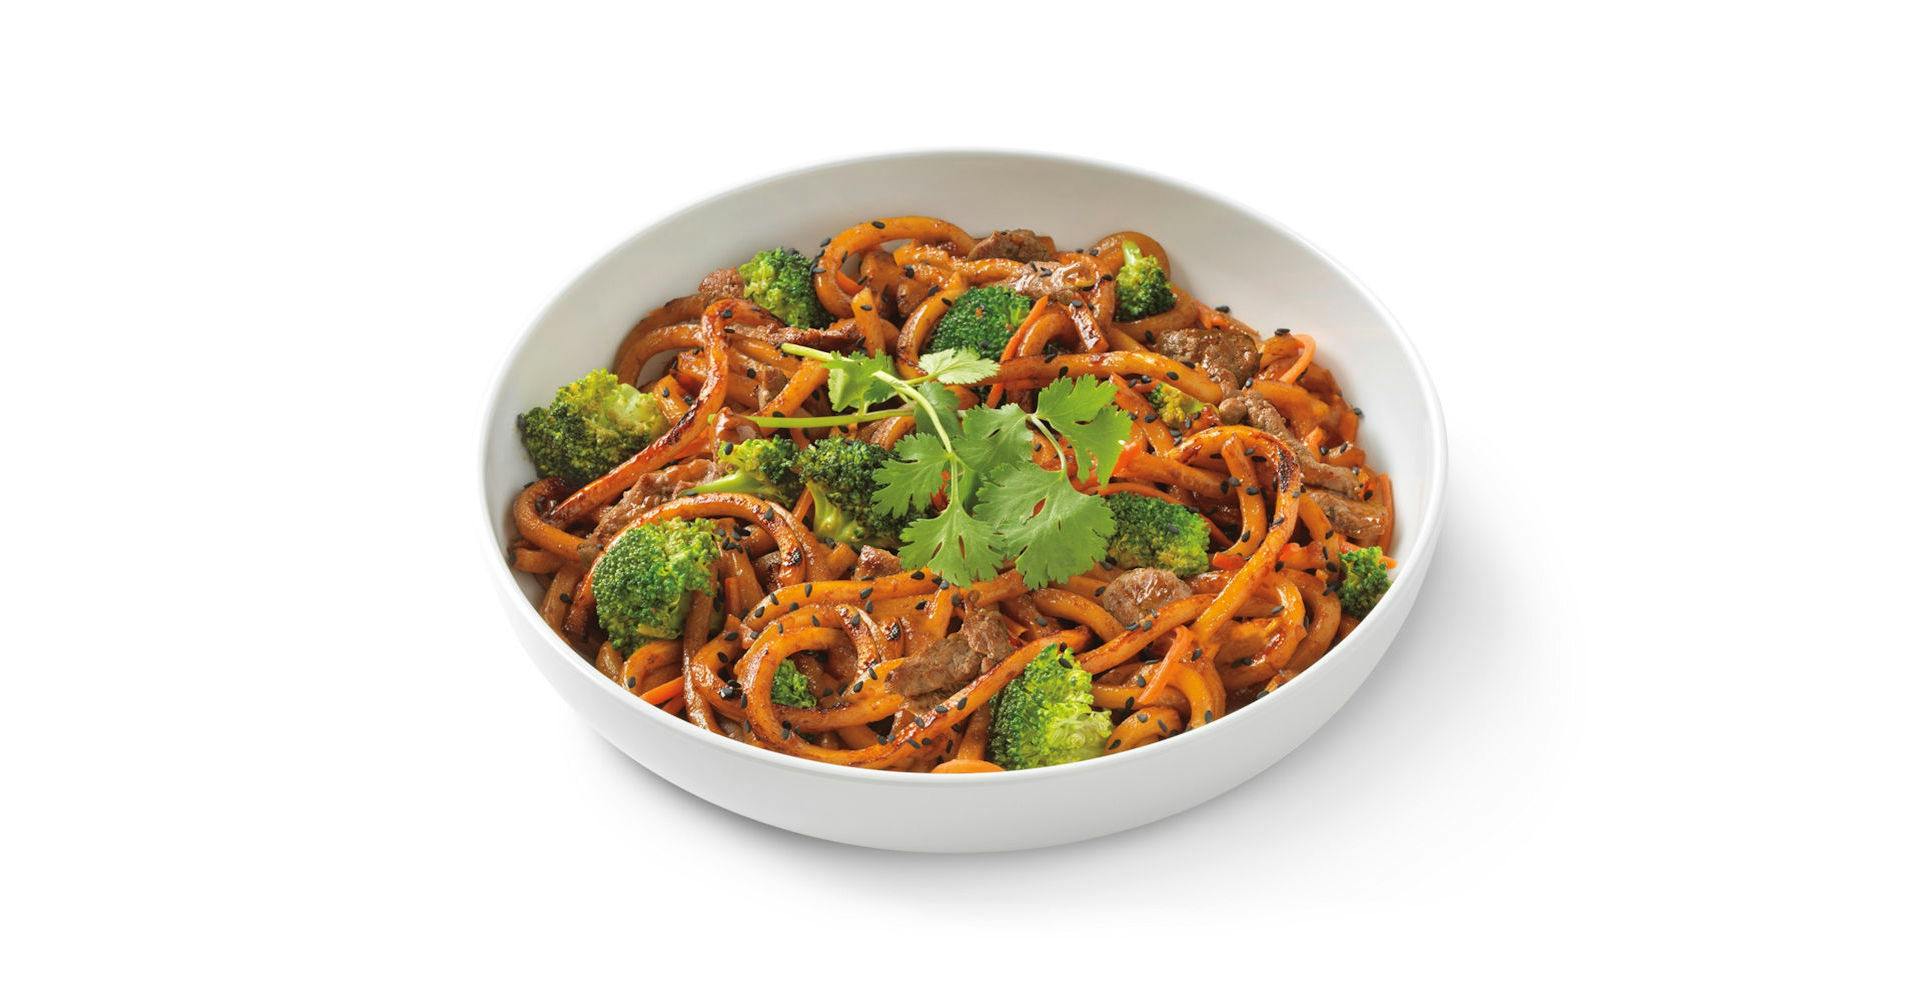 Japanese Pan Noodles with Marinated Steak from Noodles & Company - Ames in Ames, IA